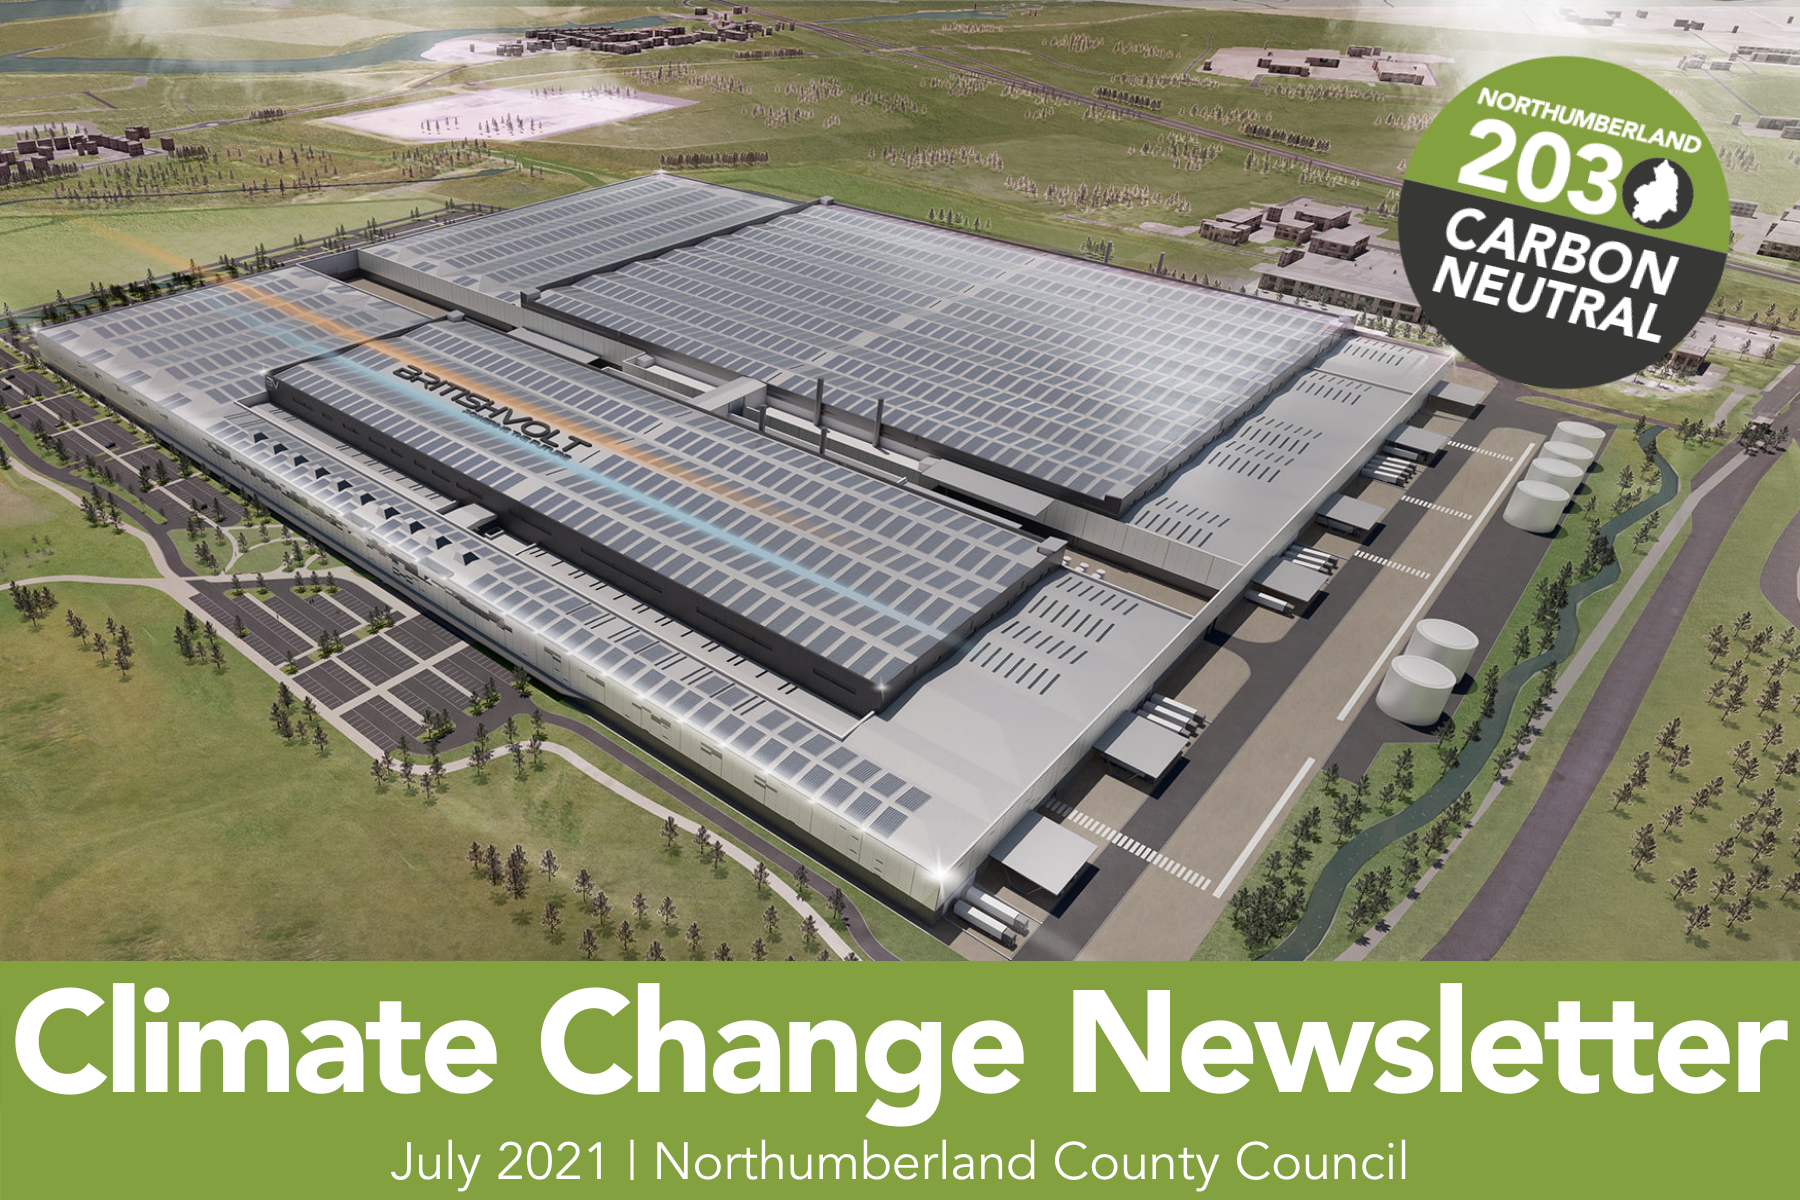 Birds eye view of Britishvolt plans with text: 'Climate Change Newsletter, July 2021, Northumberland County Council' overlayed